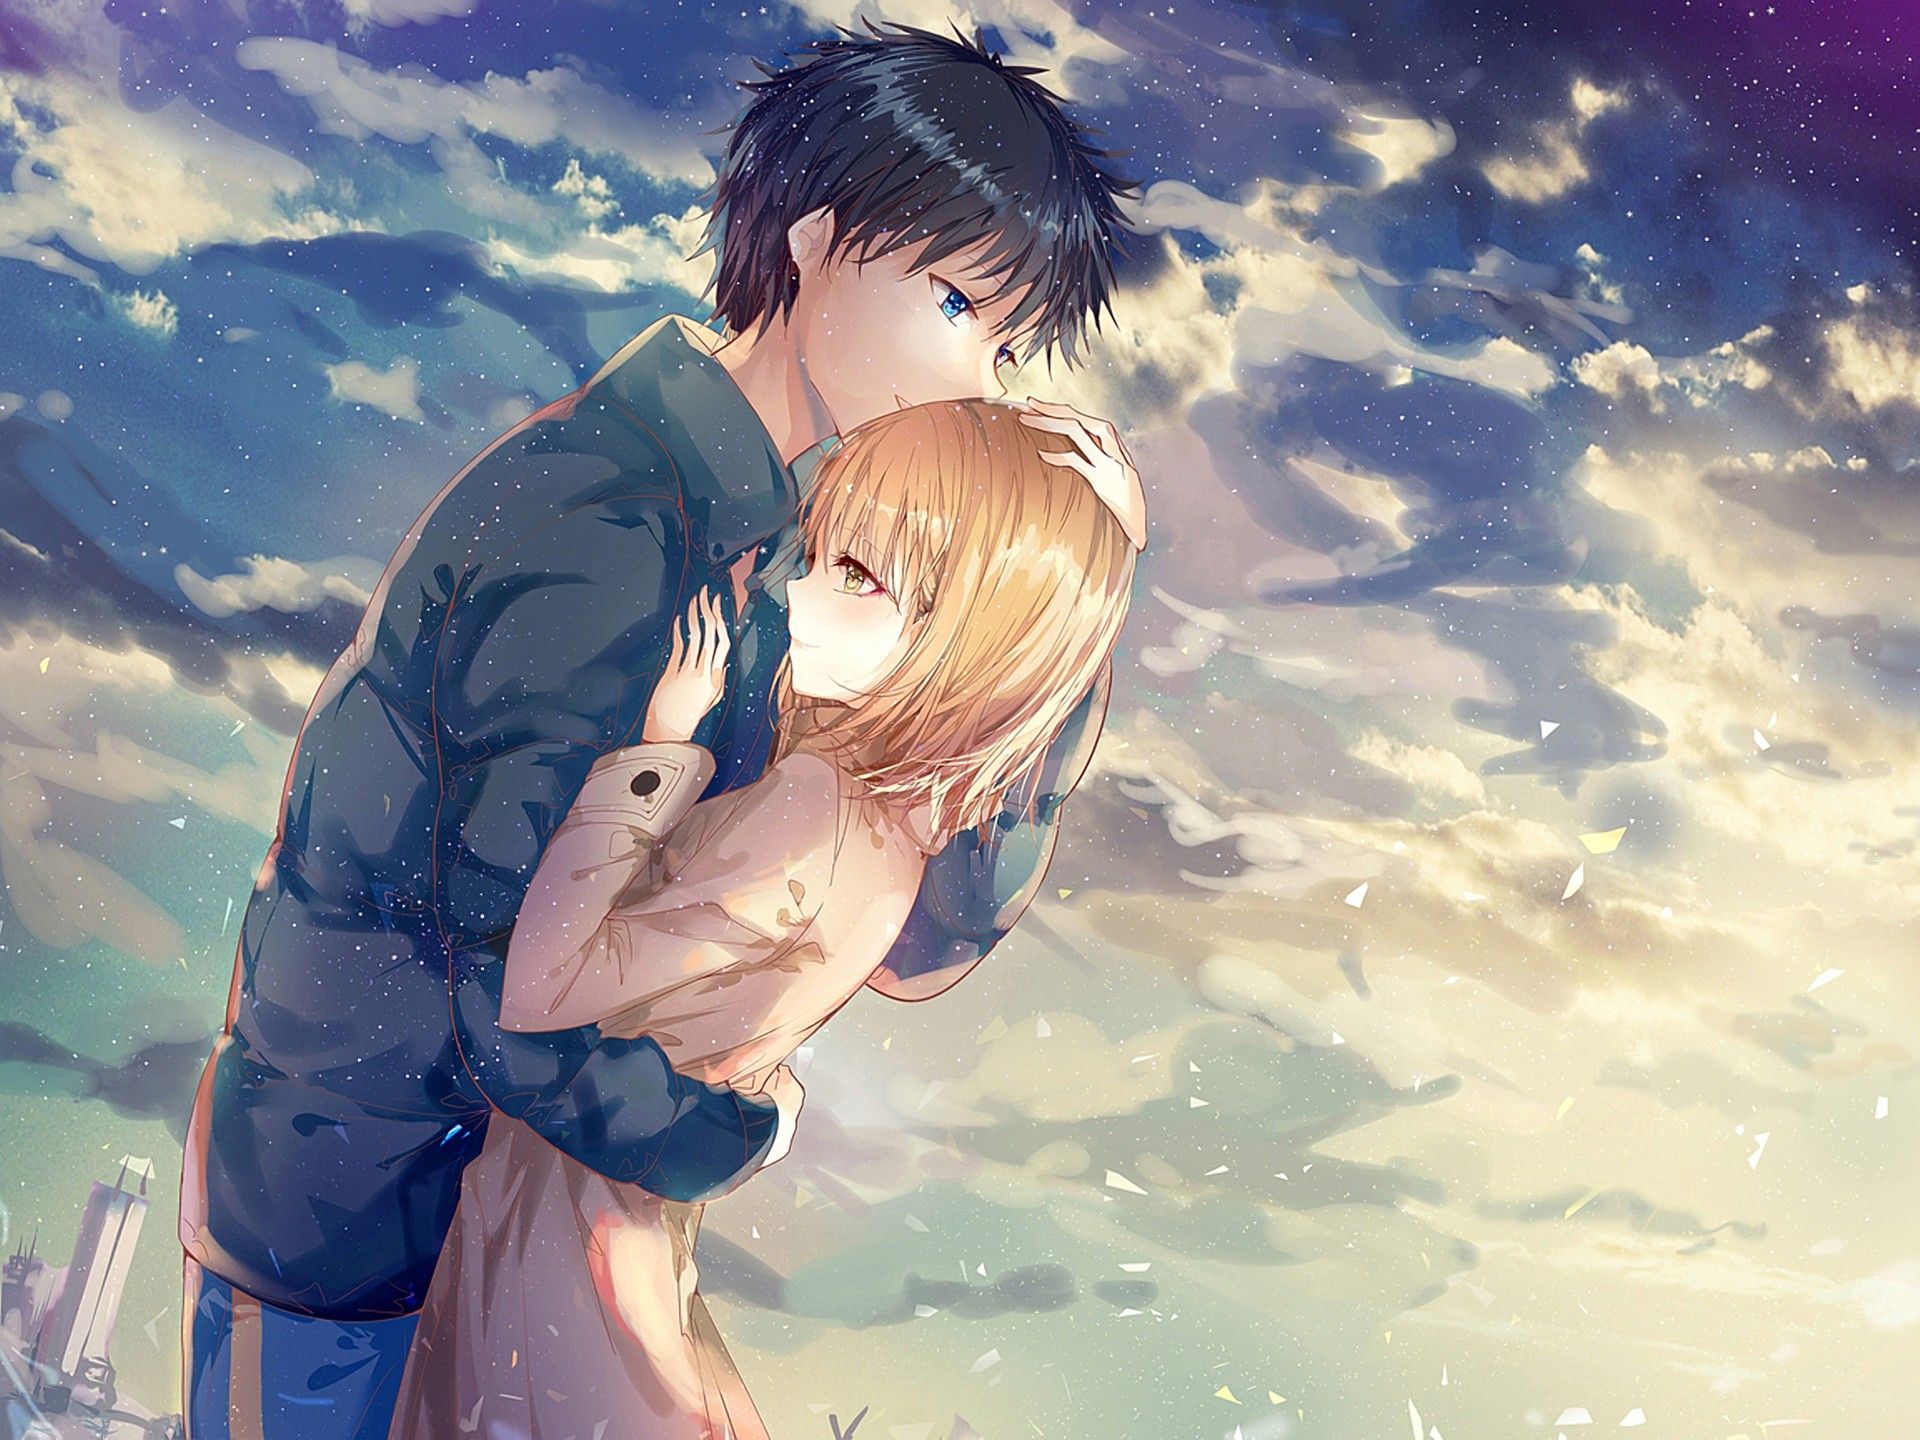 Cute Romantic Anime Couples Wallpapers on WallpaperDog